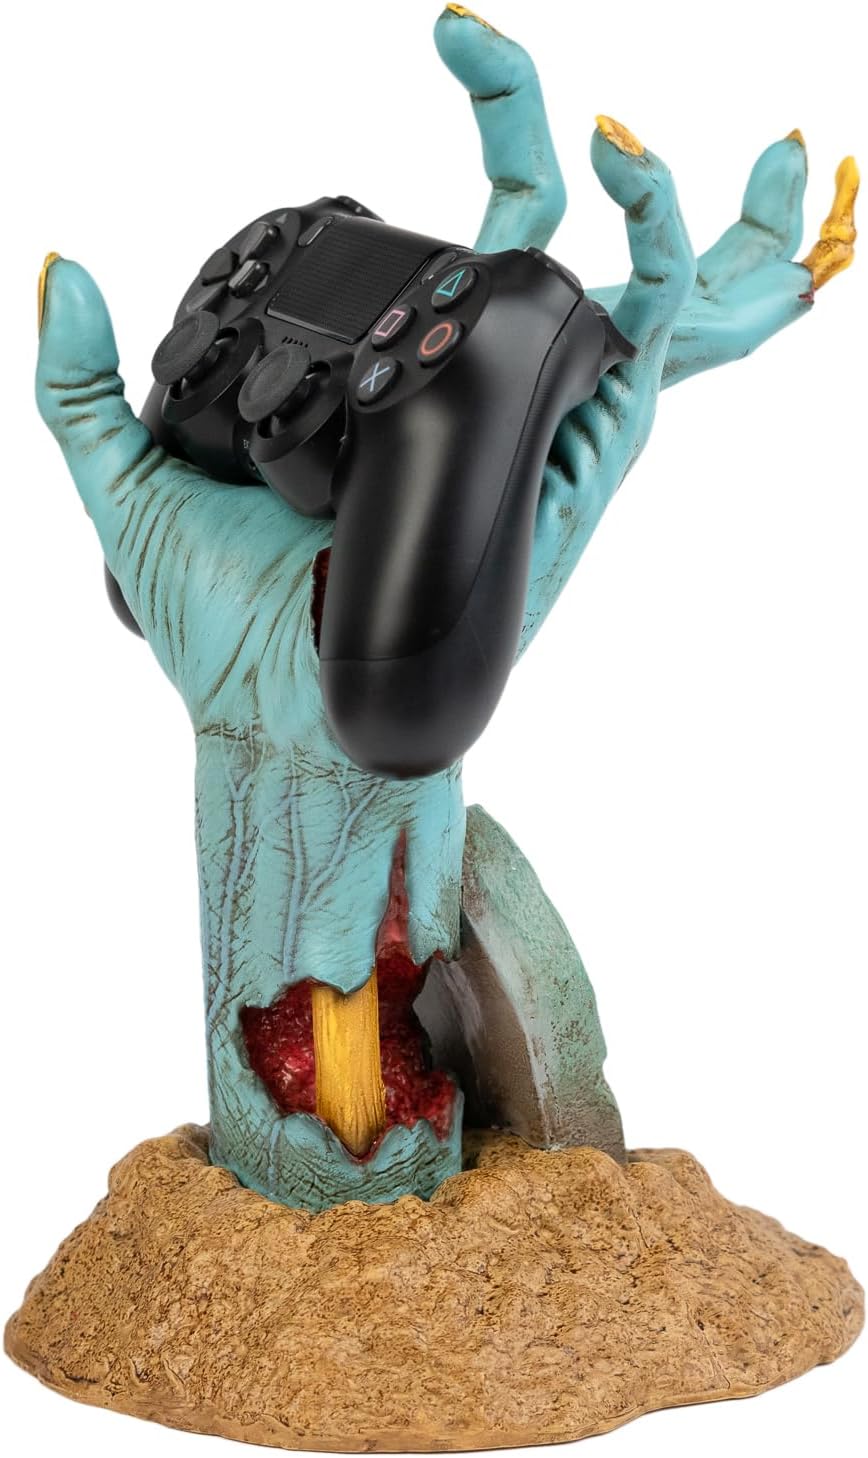 2-in-1 Zombie Gaming Controller Holder and Headphone Stand - Organize Your Gaming Setup